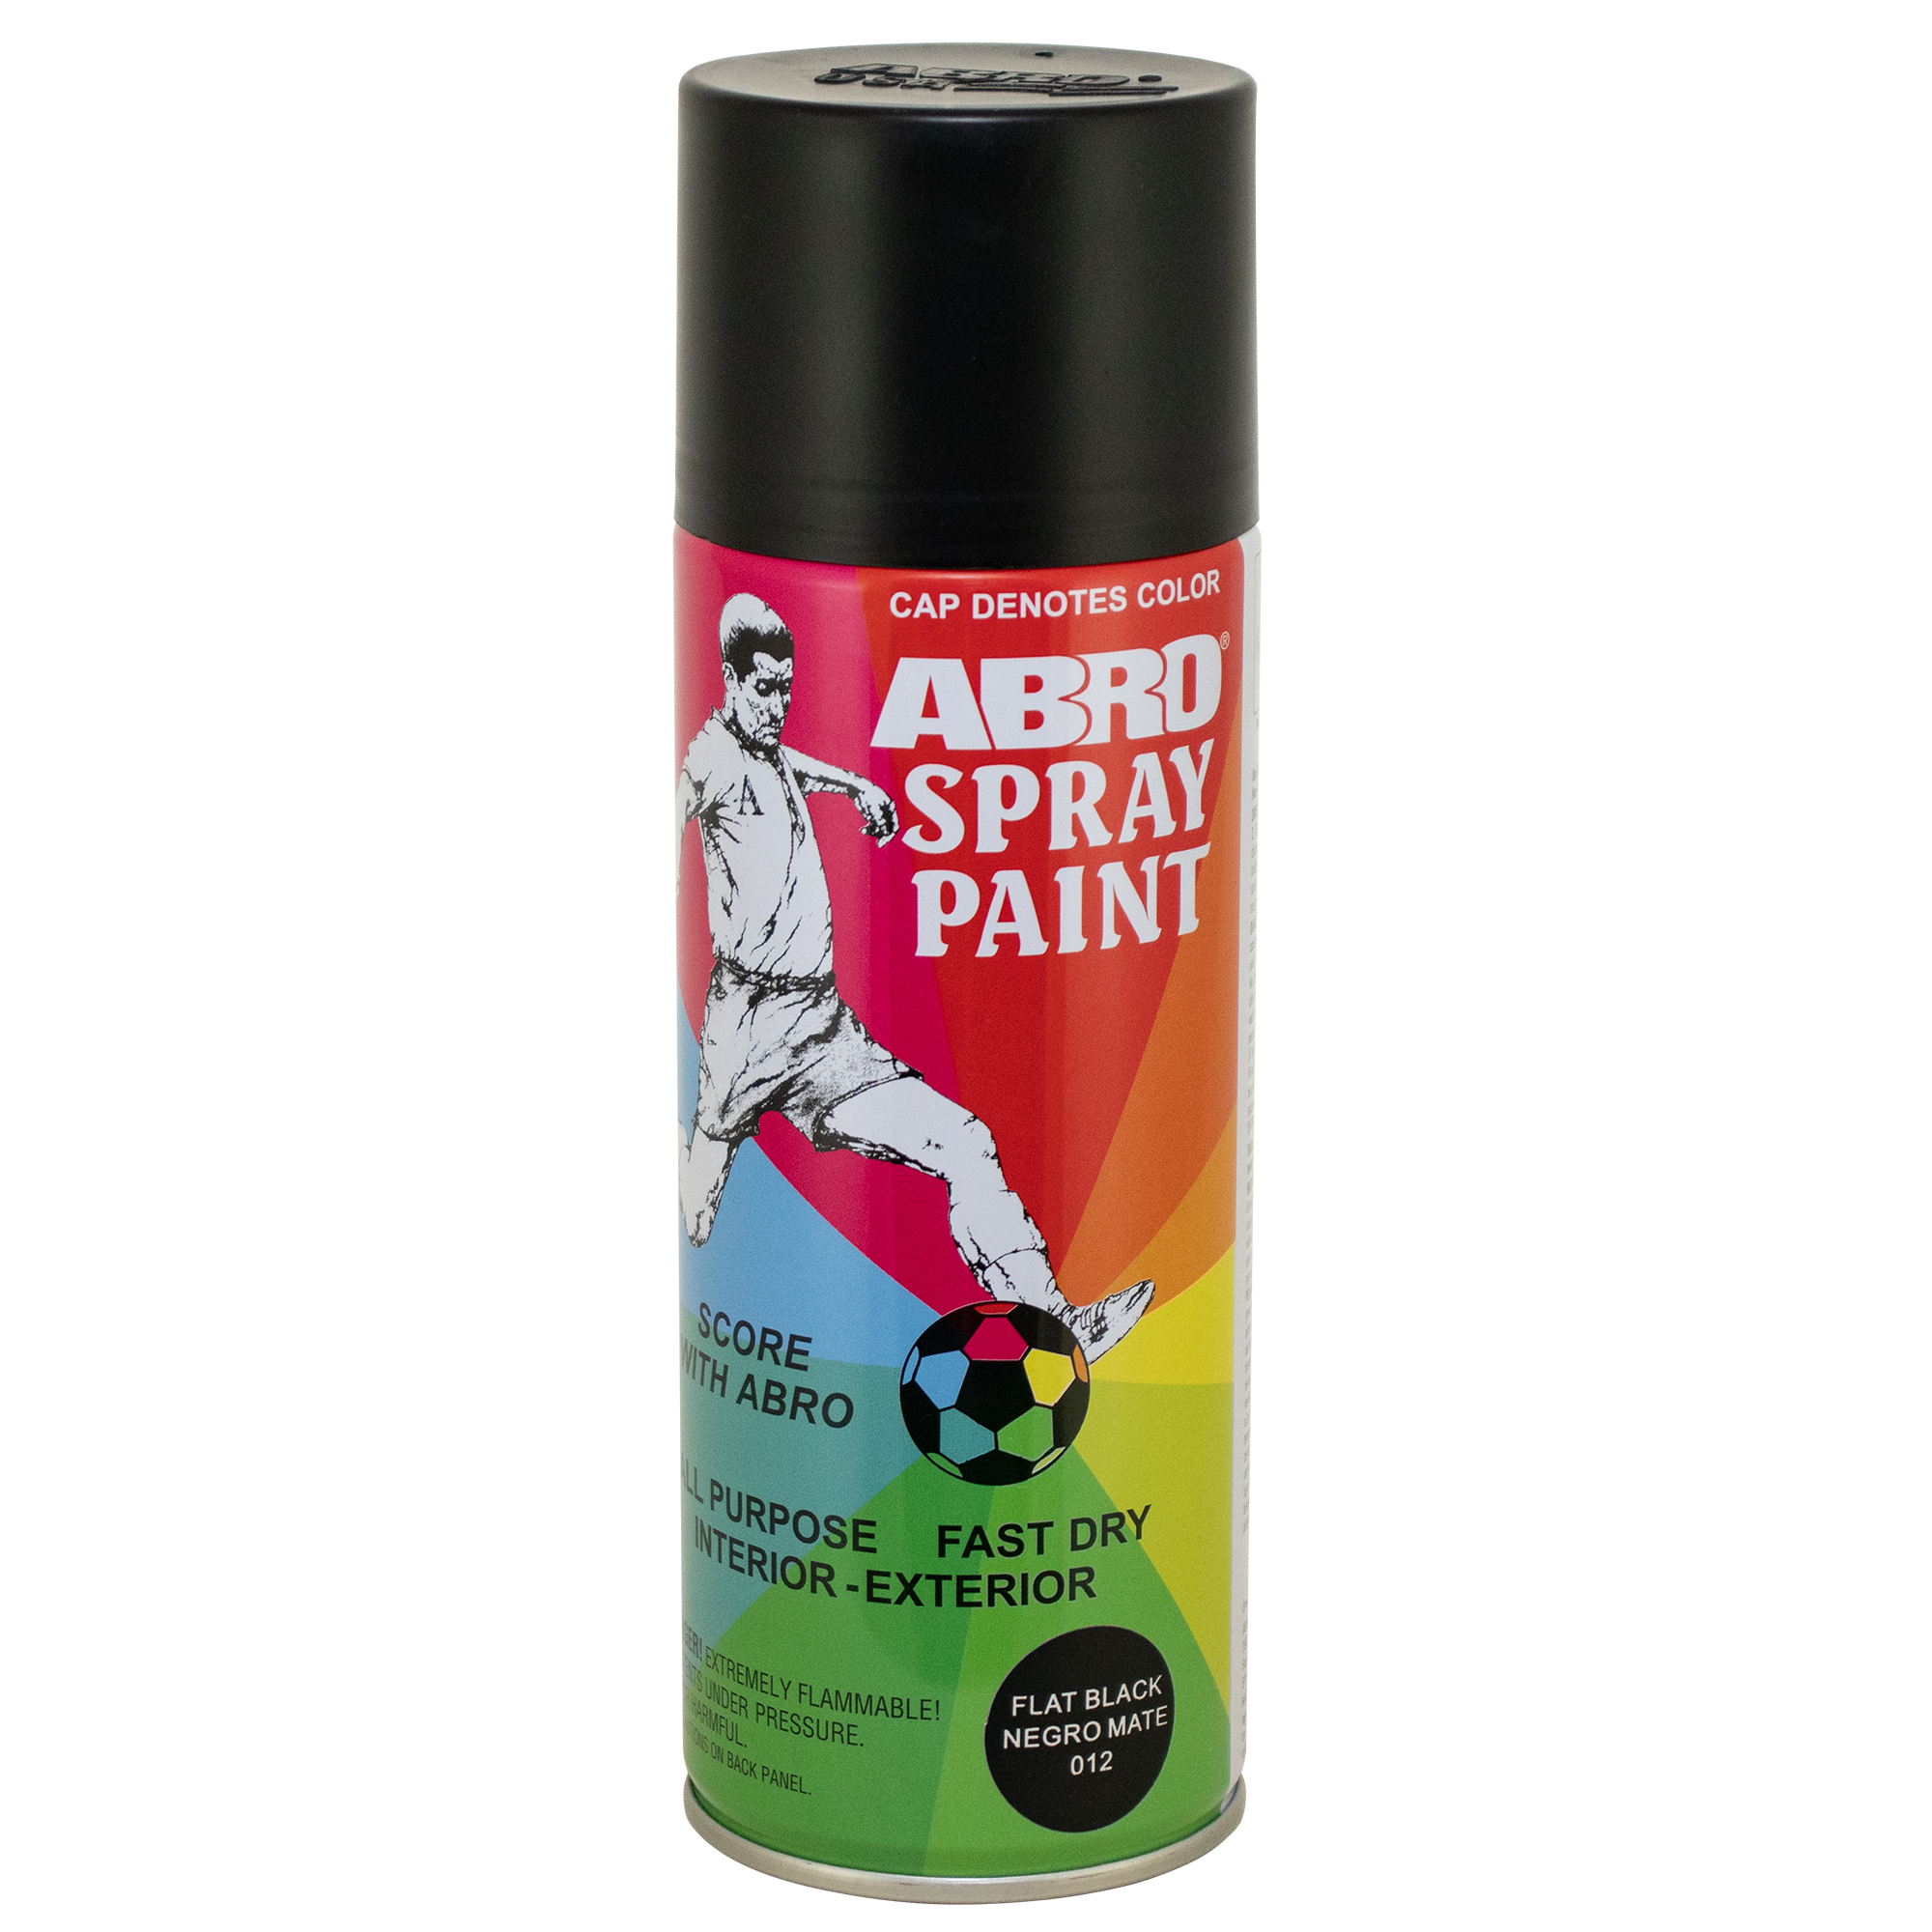 ABRO Premium Quality Spray Paint from well know USA Brand